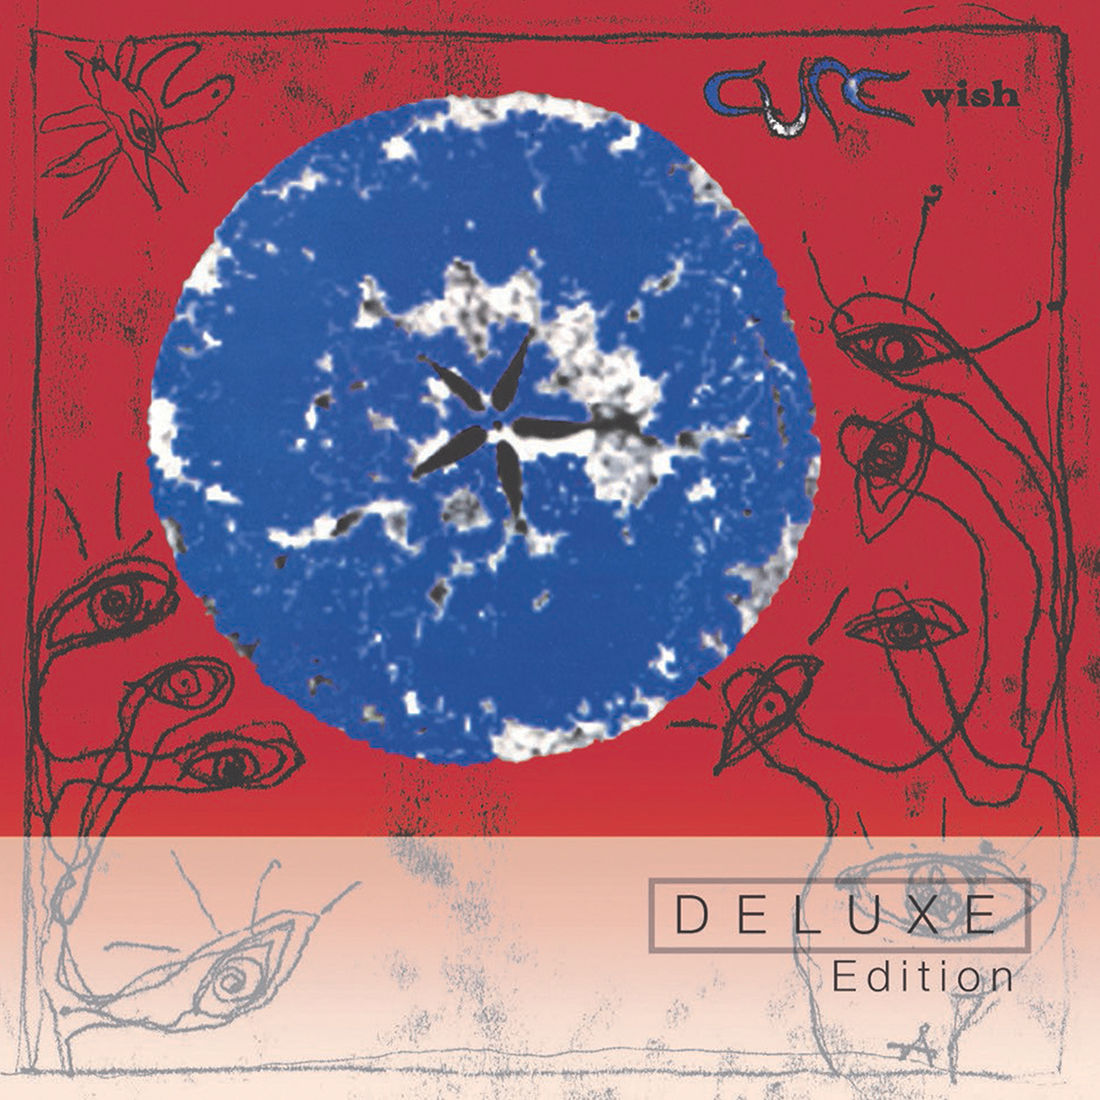 The Cure  - Wish - 30th Anniversary Deluxe Edition: 3CD